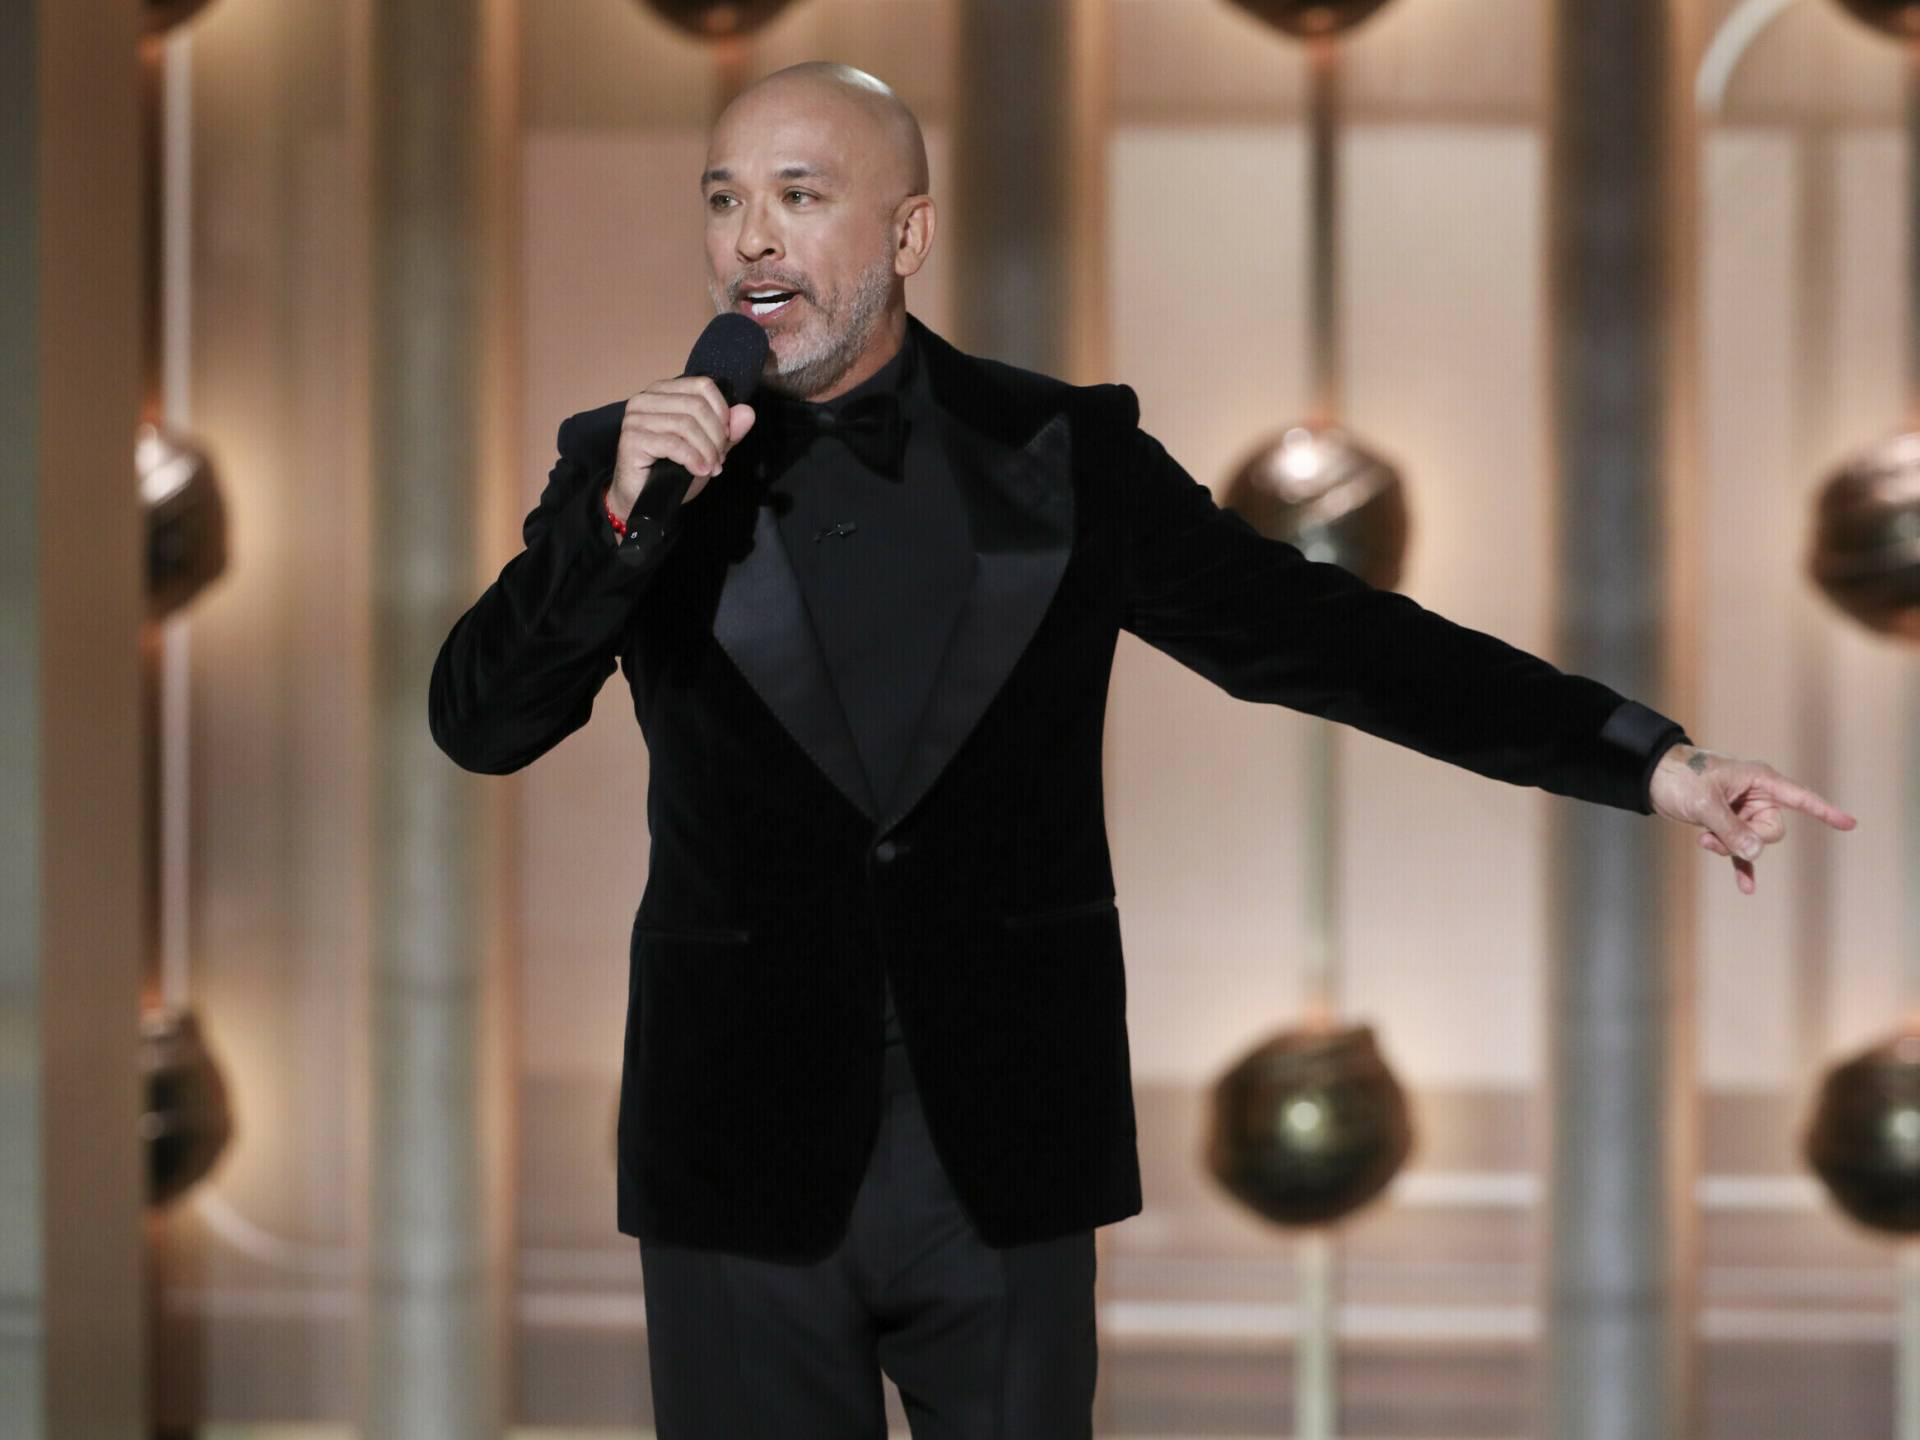 A bald man in a black suit and shirt gestures while speaking into a microphone on stage.